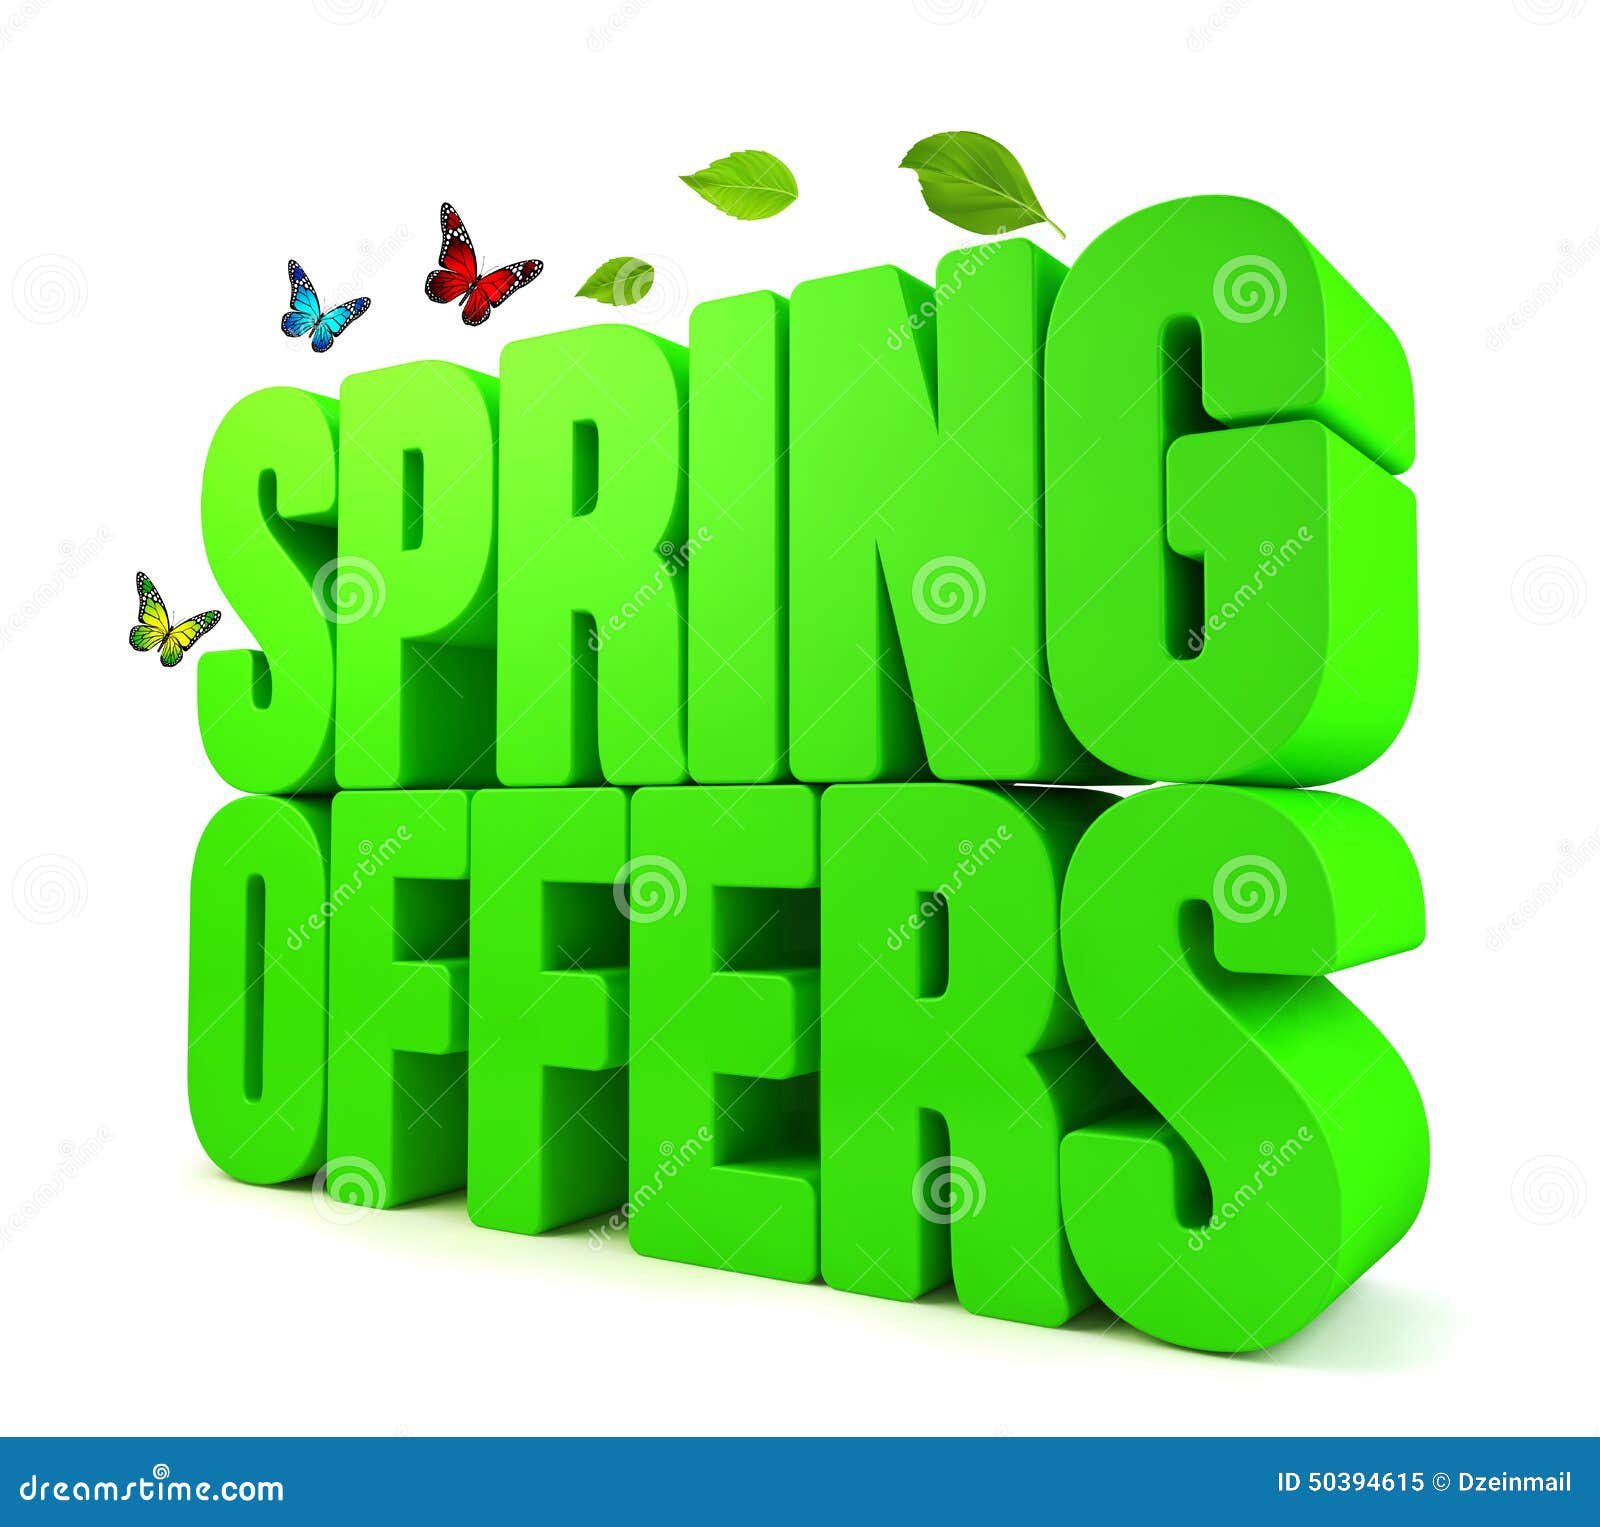 spring offers green 3d word